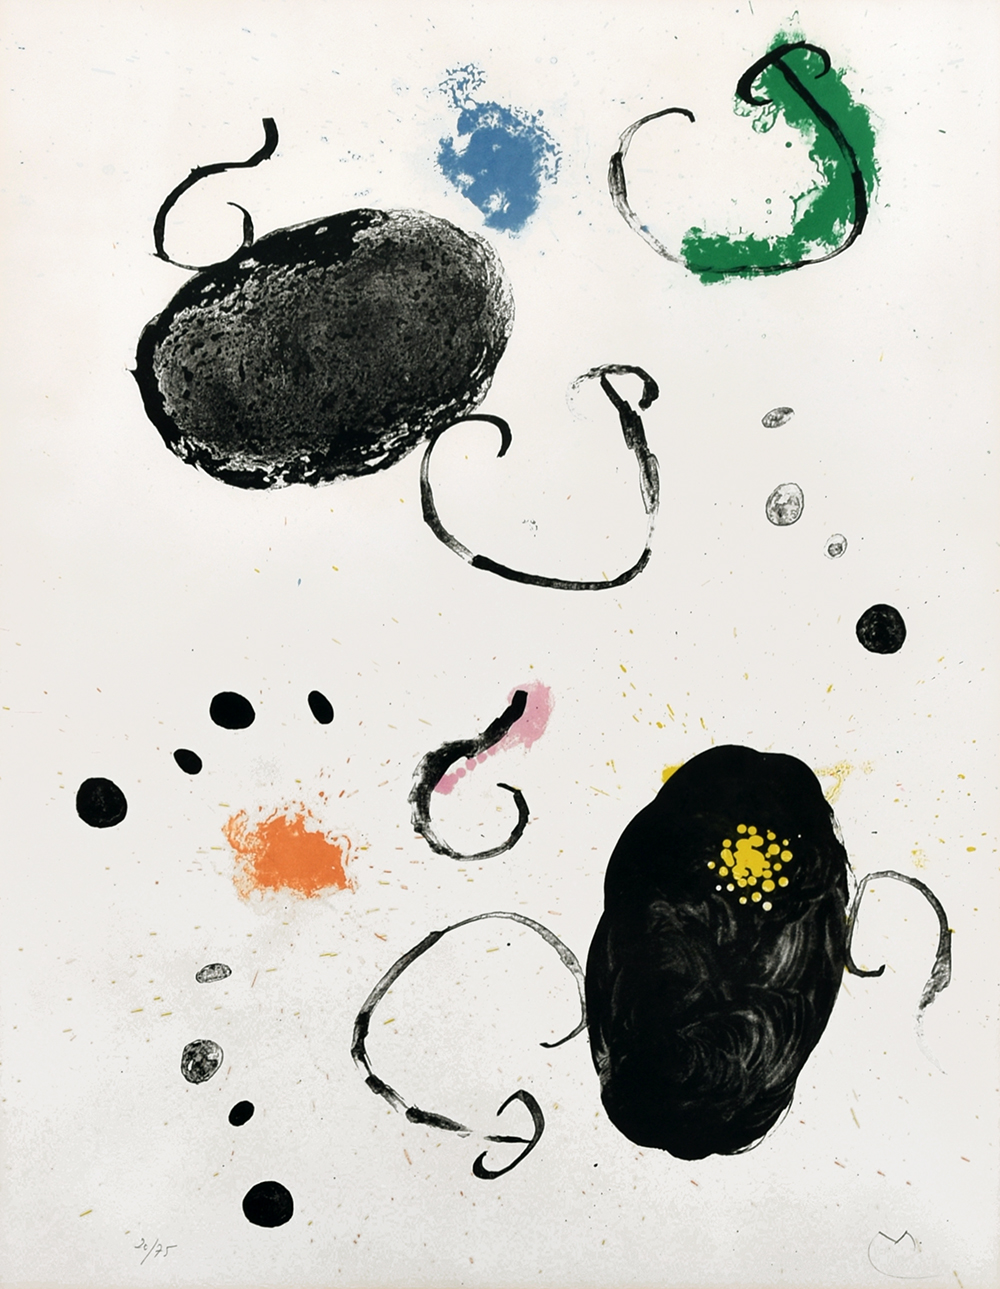 Joan Miró, Plate 15 from Album 19, 1961